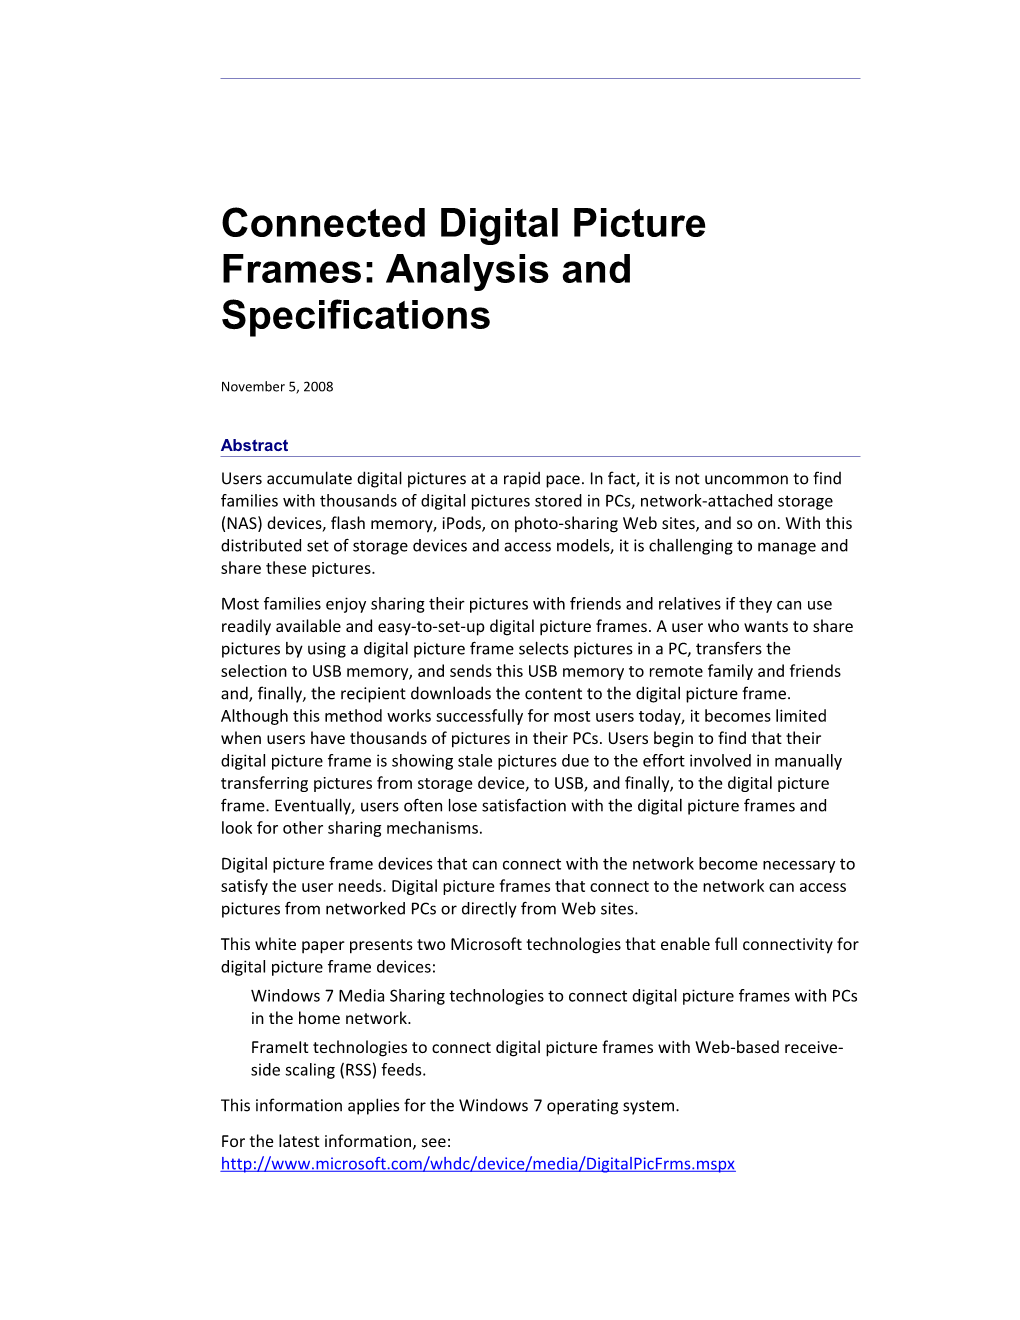 Connected Digital Picture Frames: Analysis and Specifications - 1